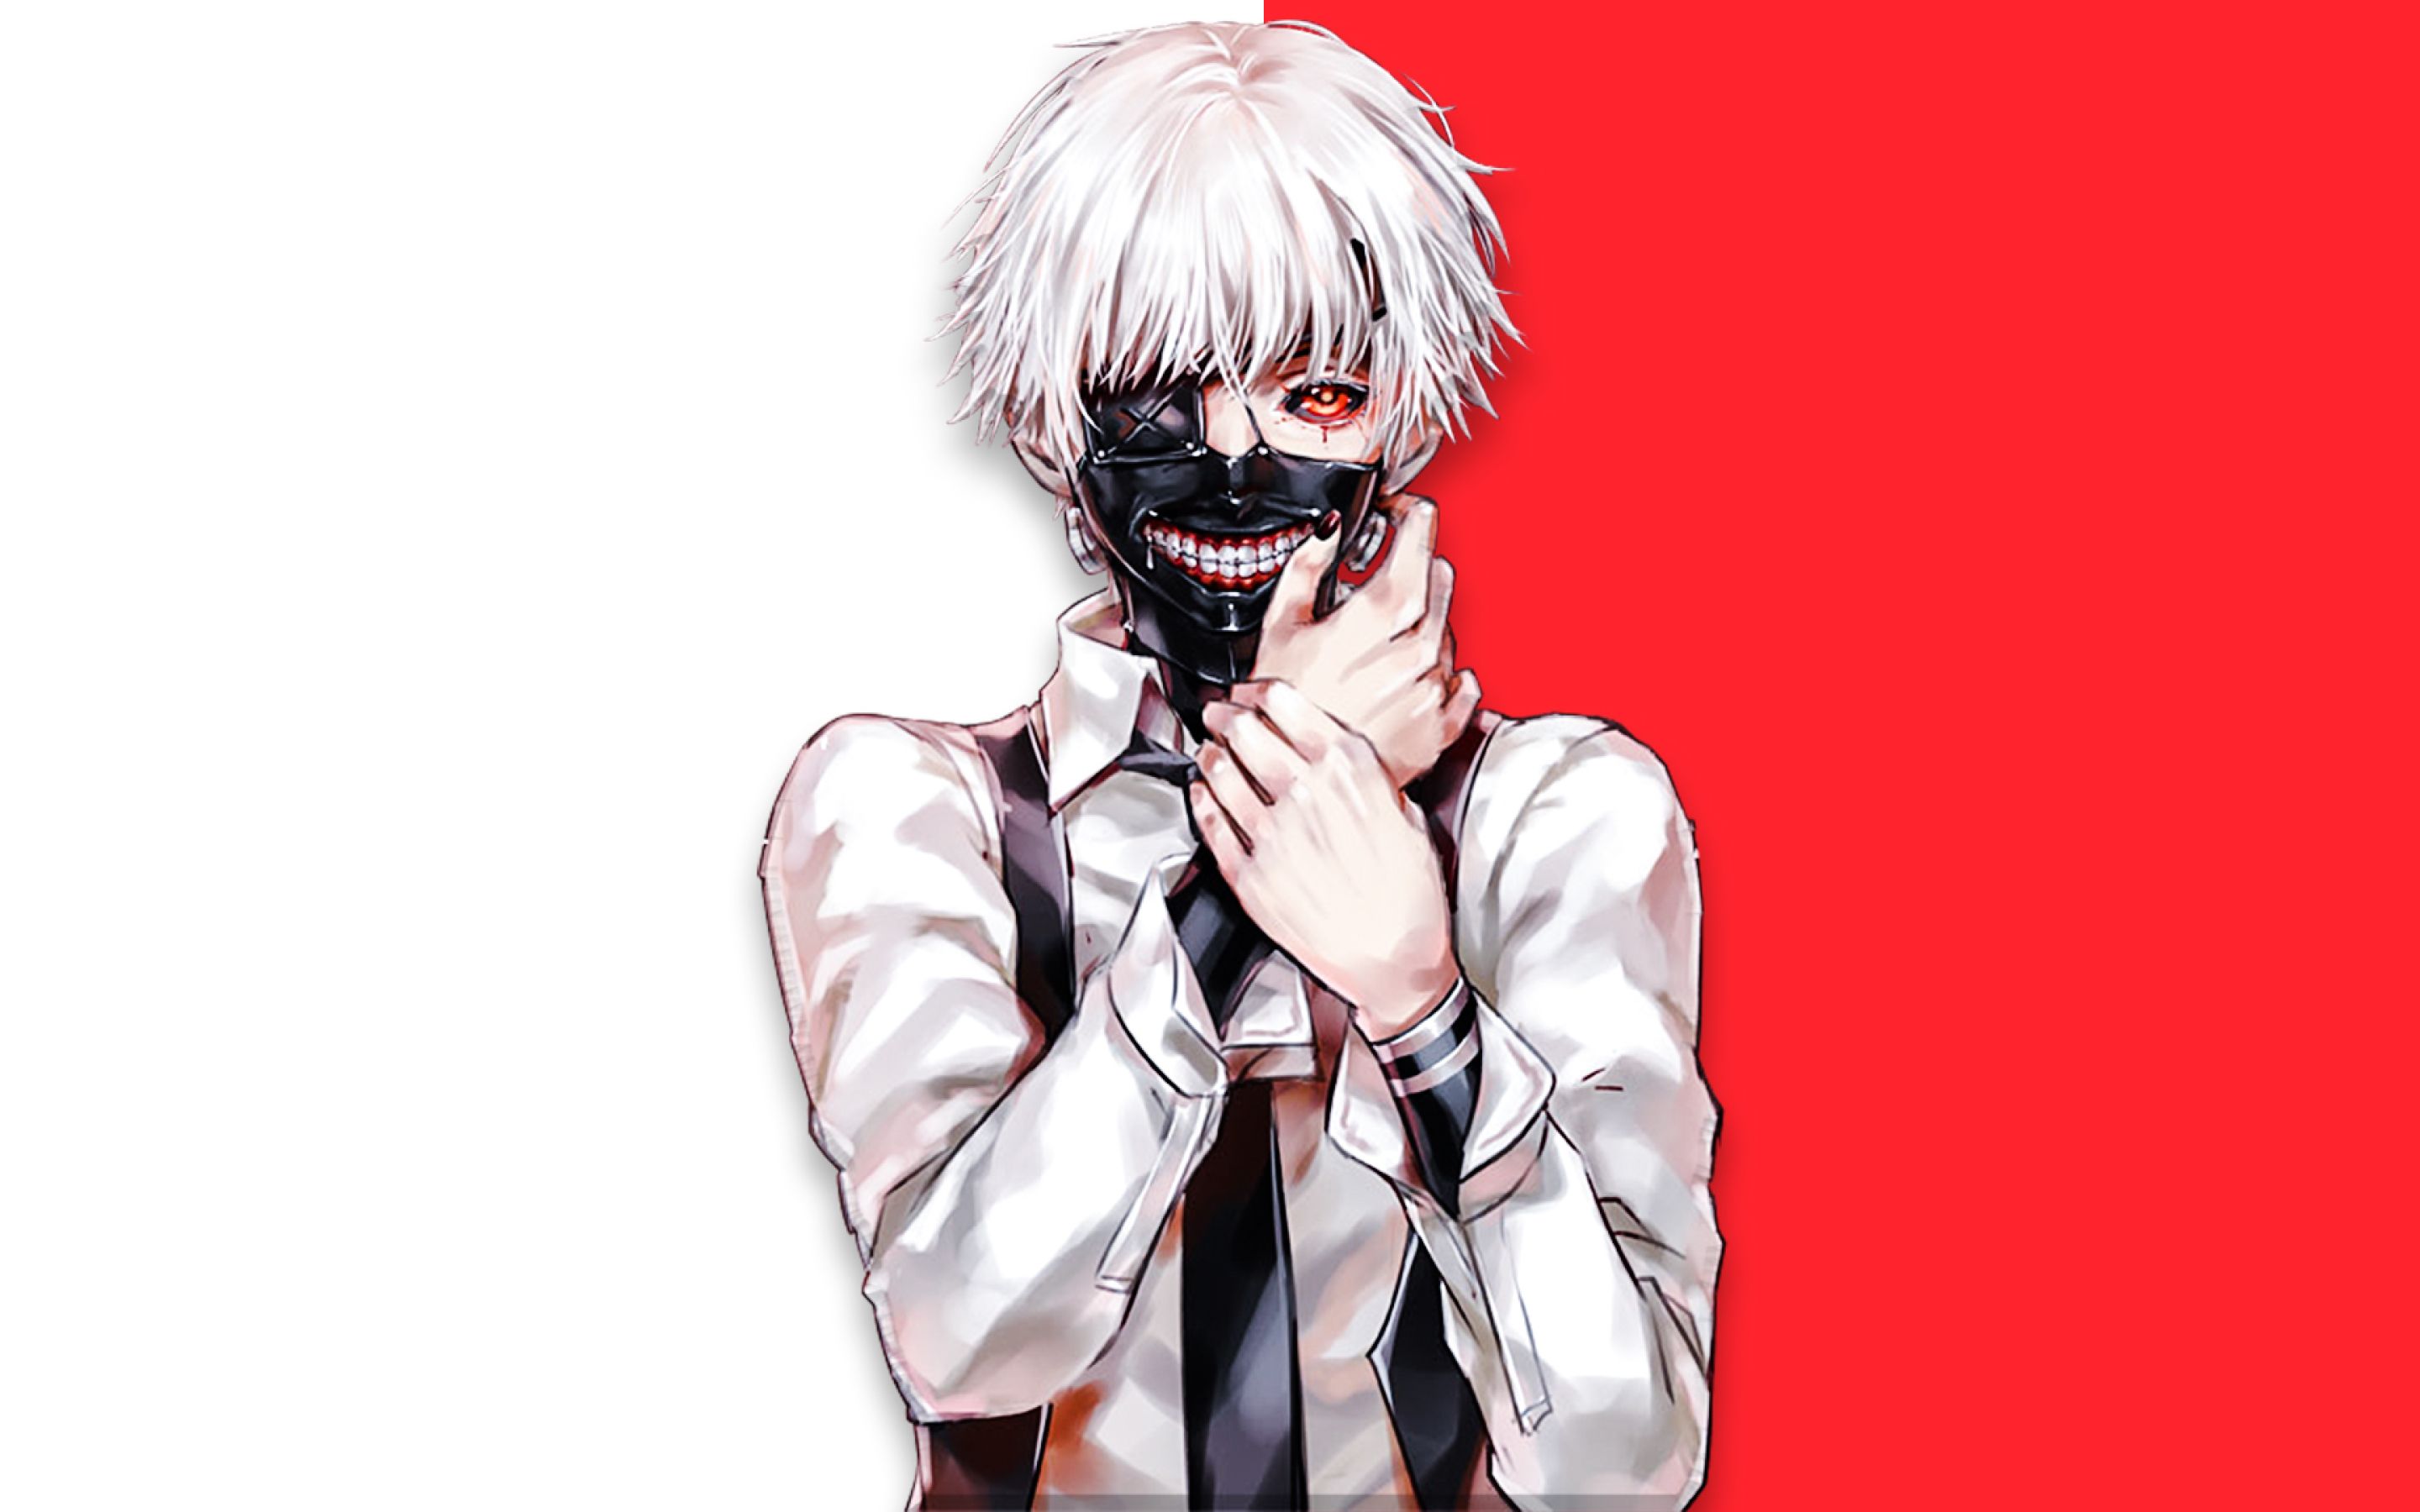 Laptop Anime Tokyo Ghoul Wallpapers - Wallpaper Cave